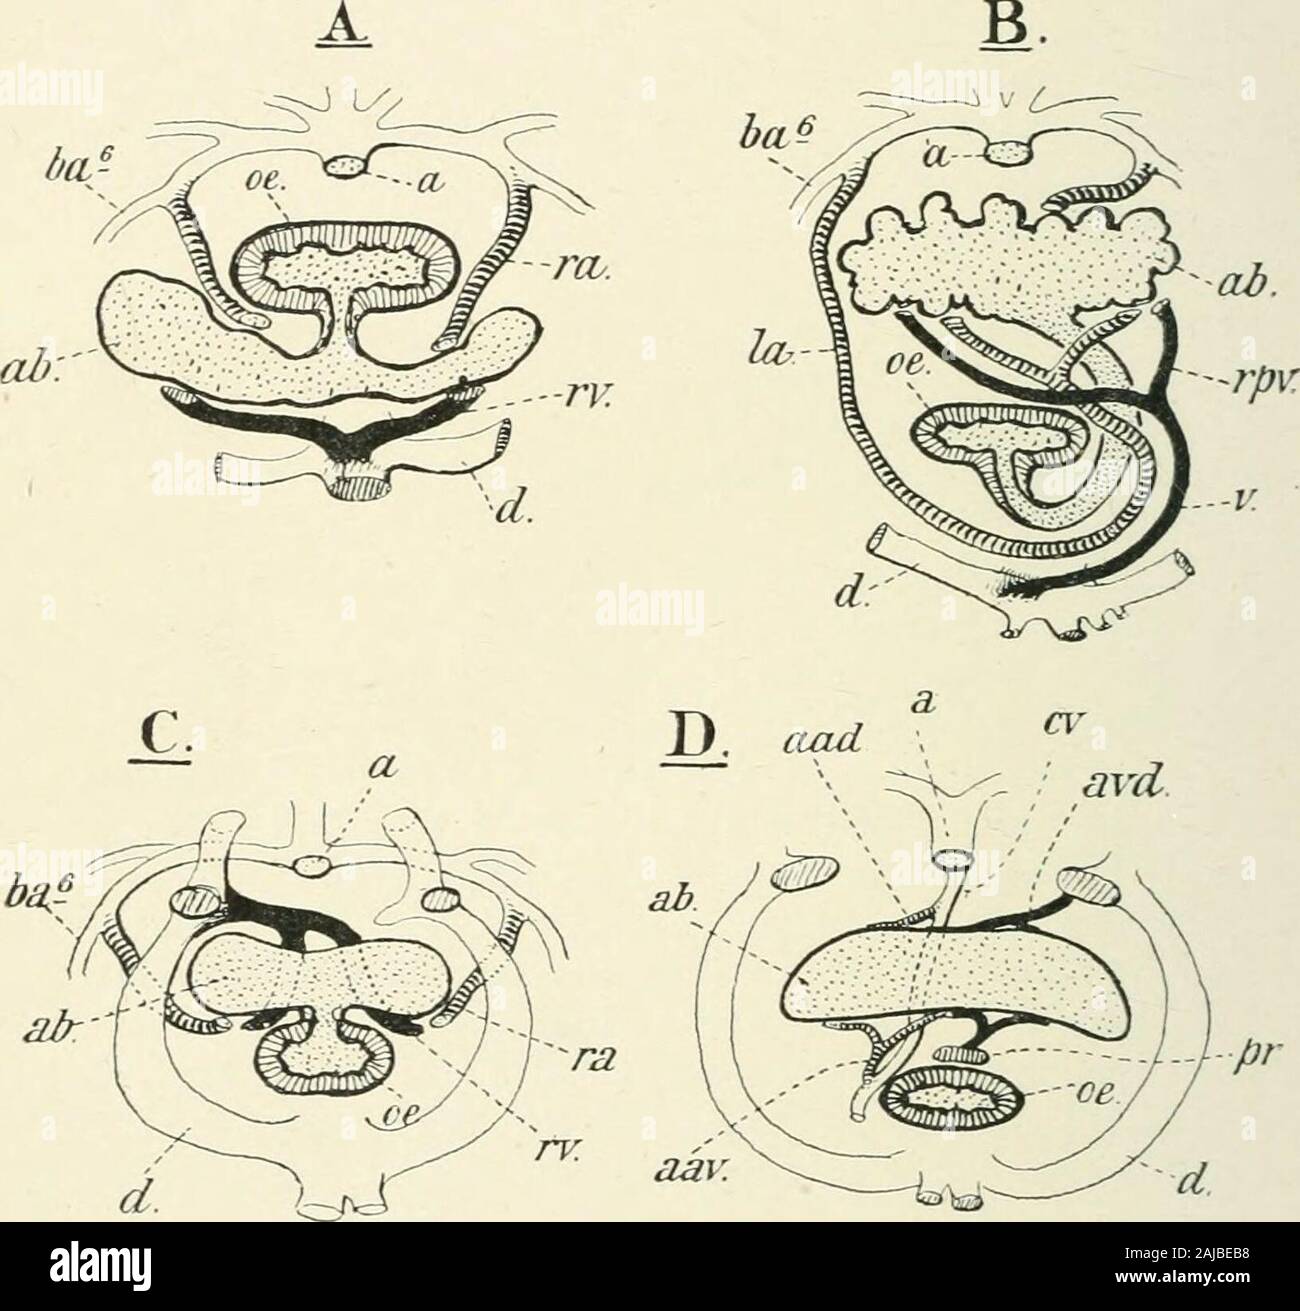 A treatise on zoology . is supplied to the bladder in Polypterus and in the Dipnoi bypaired afferent pulmonary arteries, derived from the last (fourth)branchial arch, the sixth of the embryonic series (Fig. 197). Theblood is returned to the heart in Polypterus by paired efferent vessels,opening into the hepatic vein near the sinus venosus ; in the Dipnoiby paired vessels uniting and passing directly to the sinus venosusitself on the left side. That the air-bladder of the Dipnoi wasoriginally ventral, and that its dorsal position has been secondarilyacquired, is clearly shown by the course of t Stock Photo